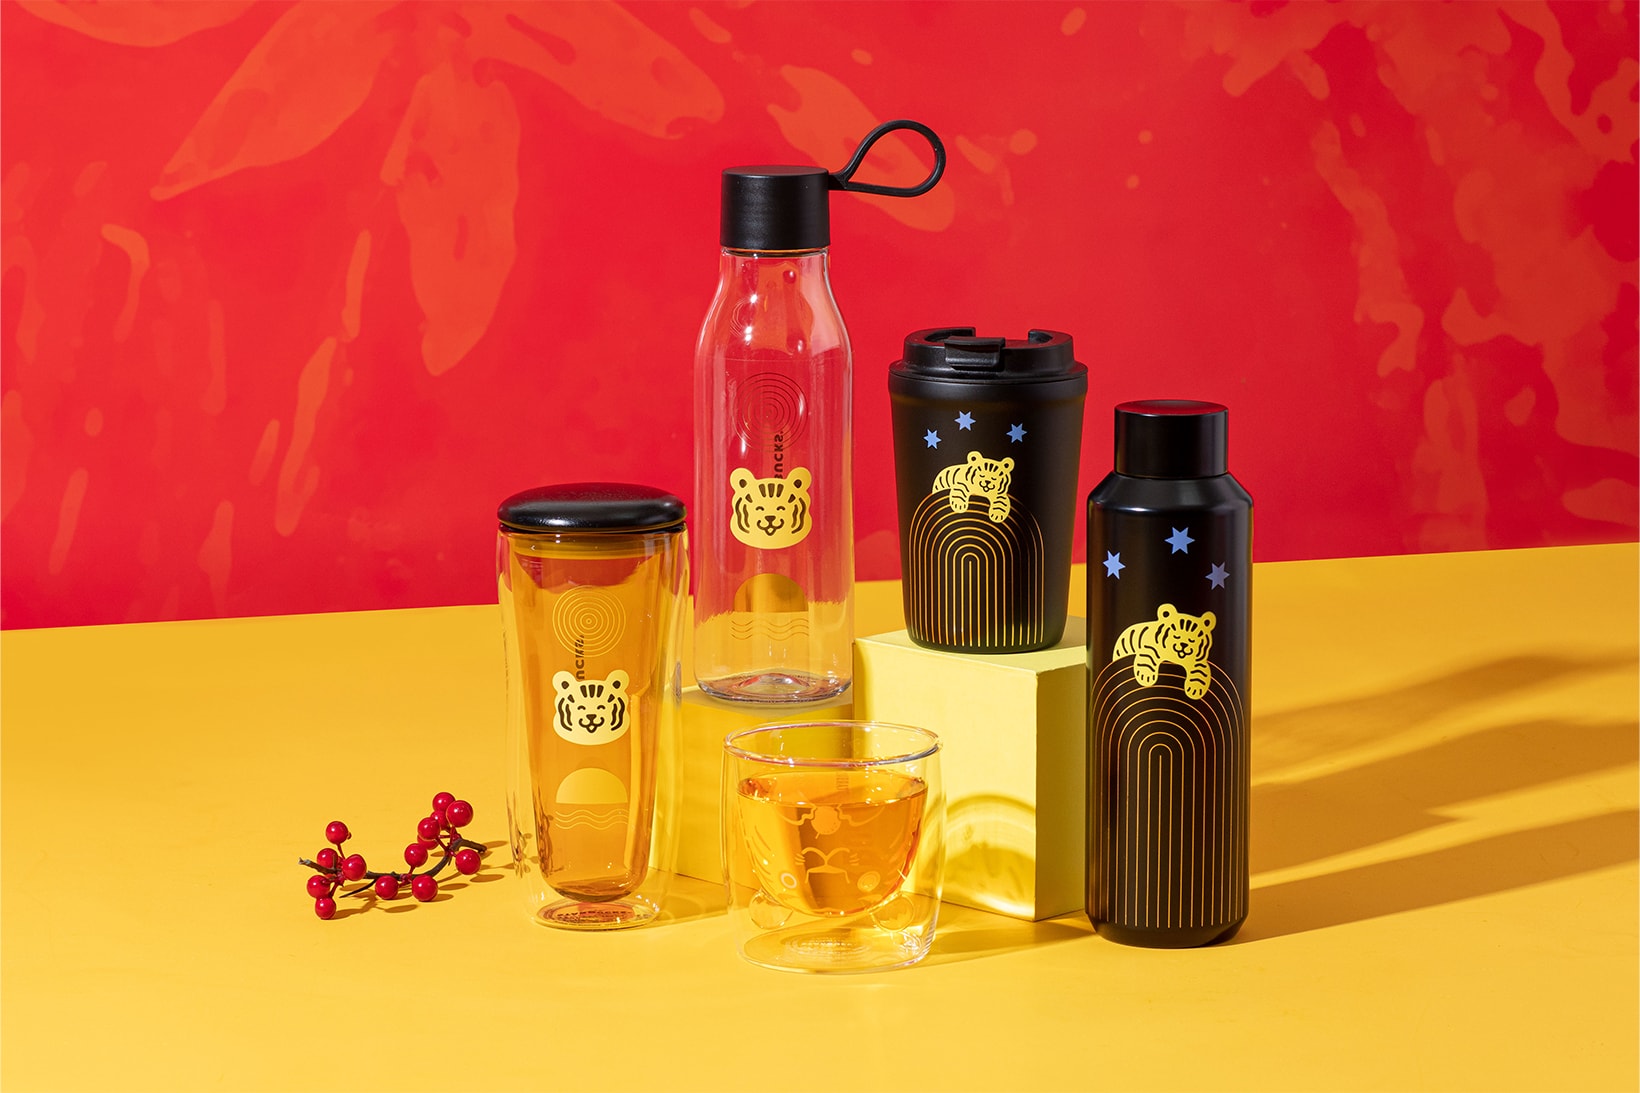 Starbucks Year of the Tiger Collection Hong Kong Drinkware Bottles Tumbler Cups